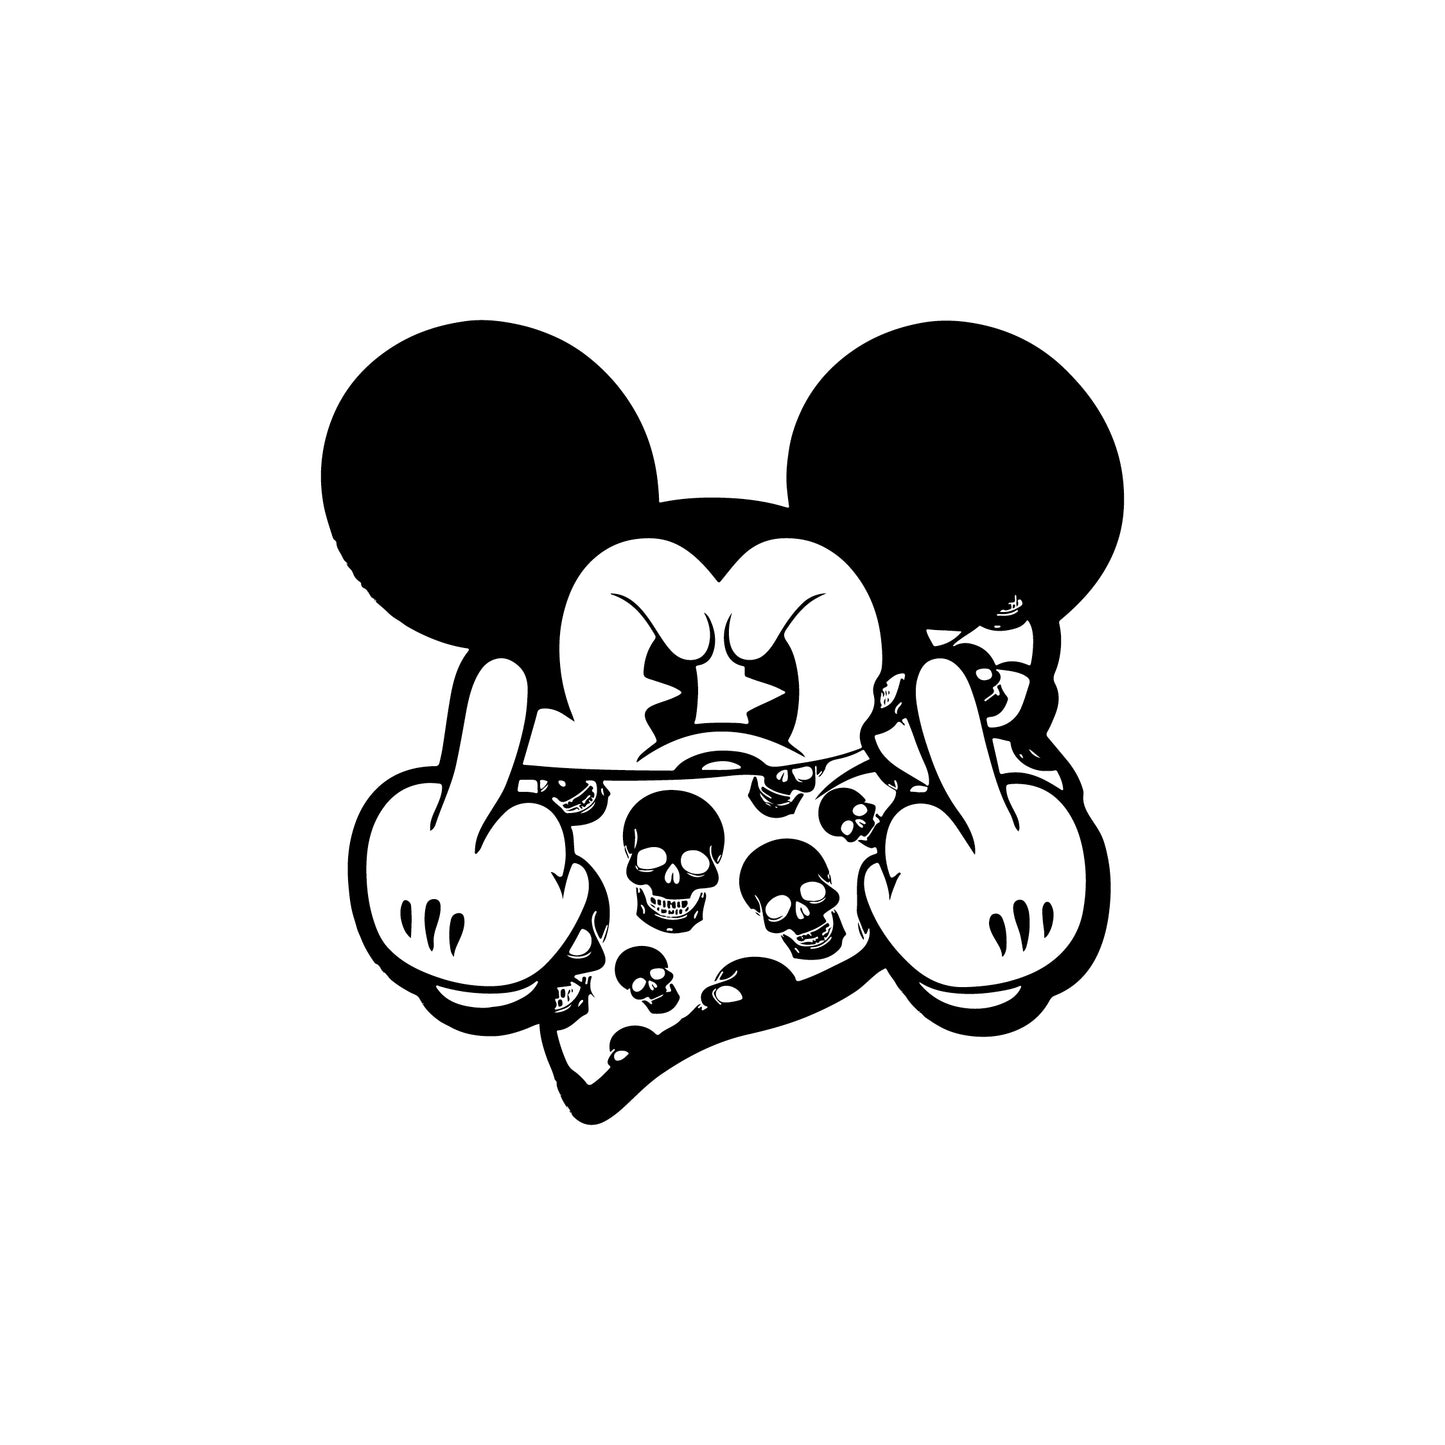 Mickey Mouse gangster - ipad decal vinyl decal design